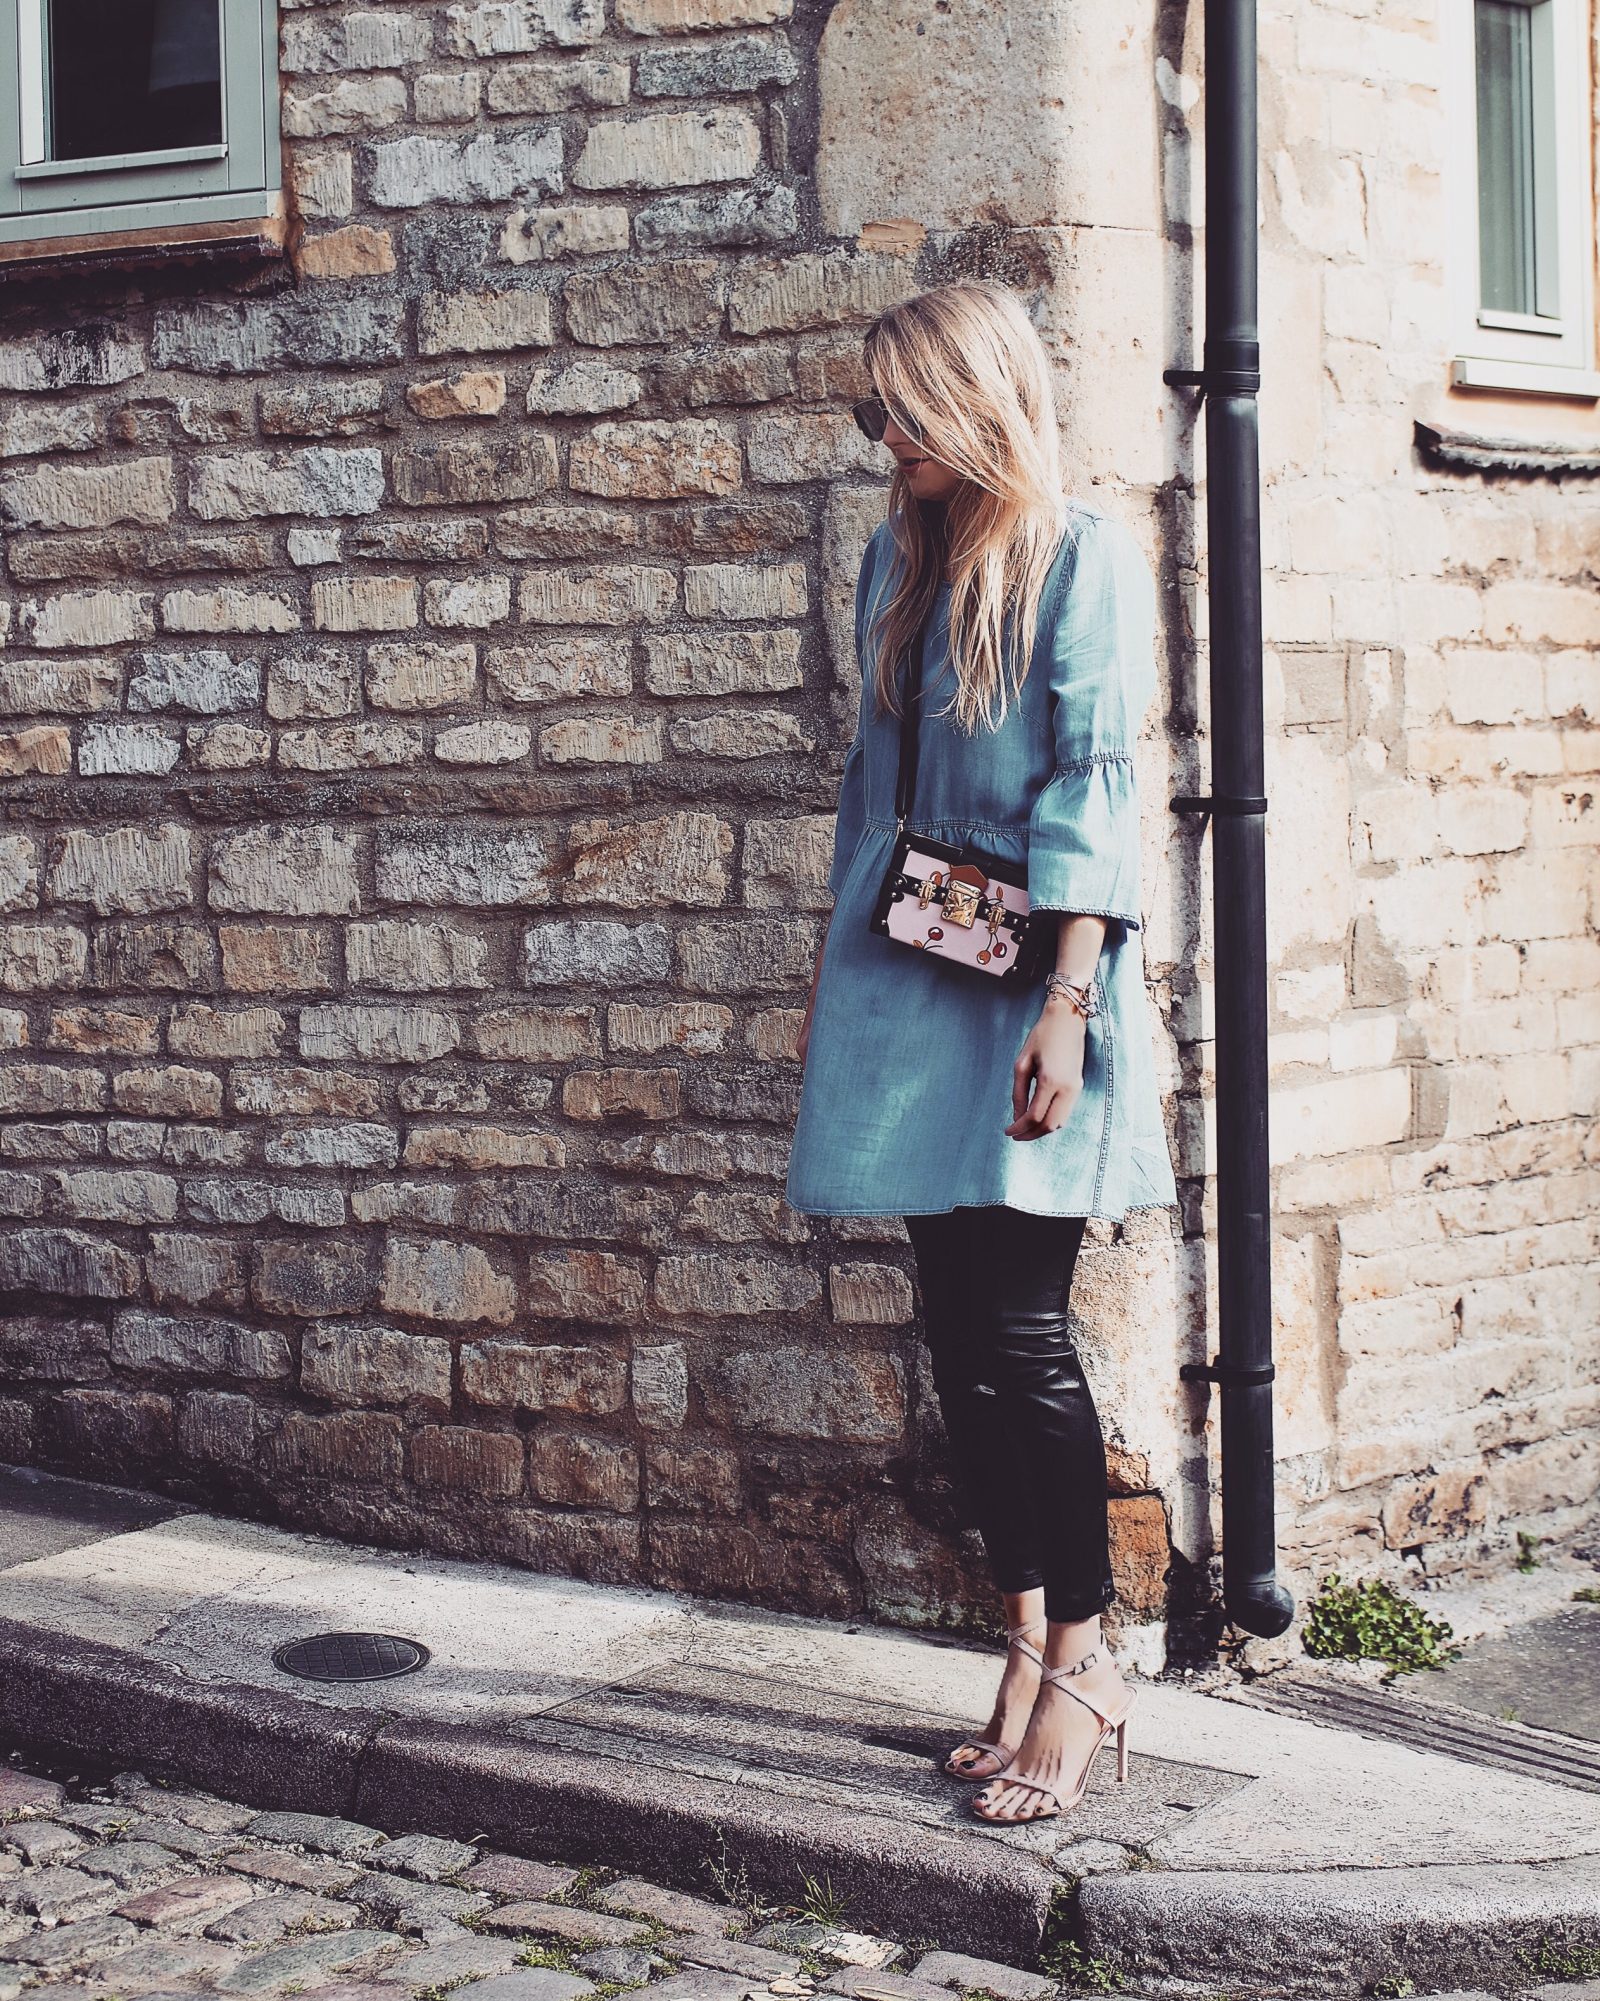 LFW Streetstyle - Fashion Blogger Outfit 